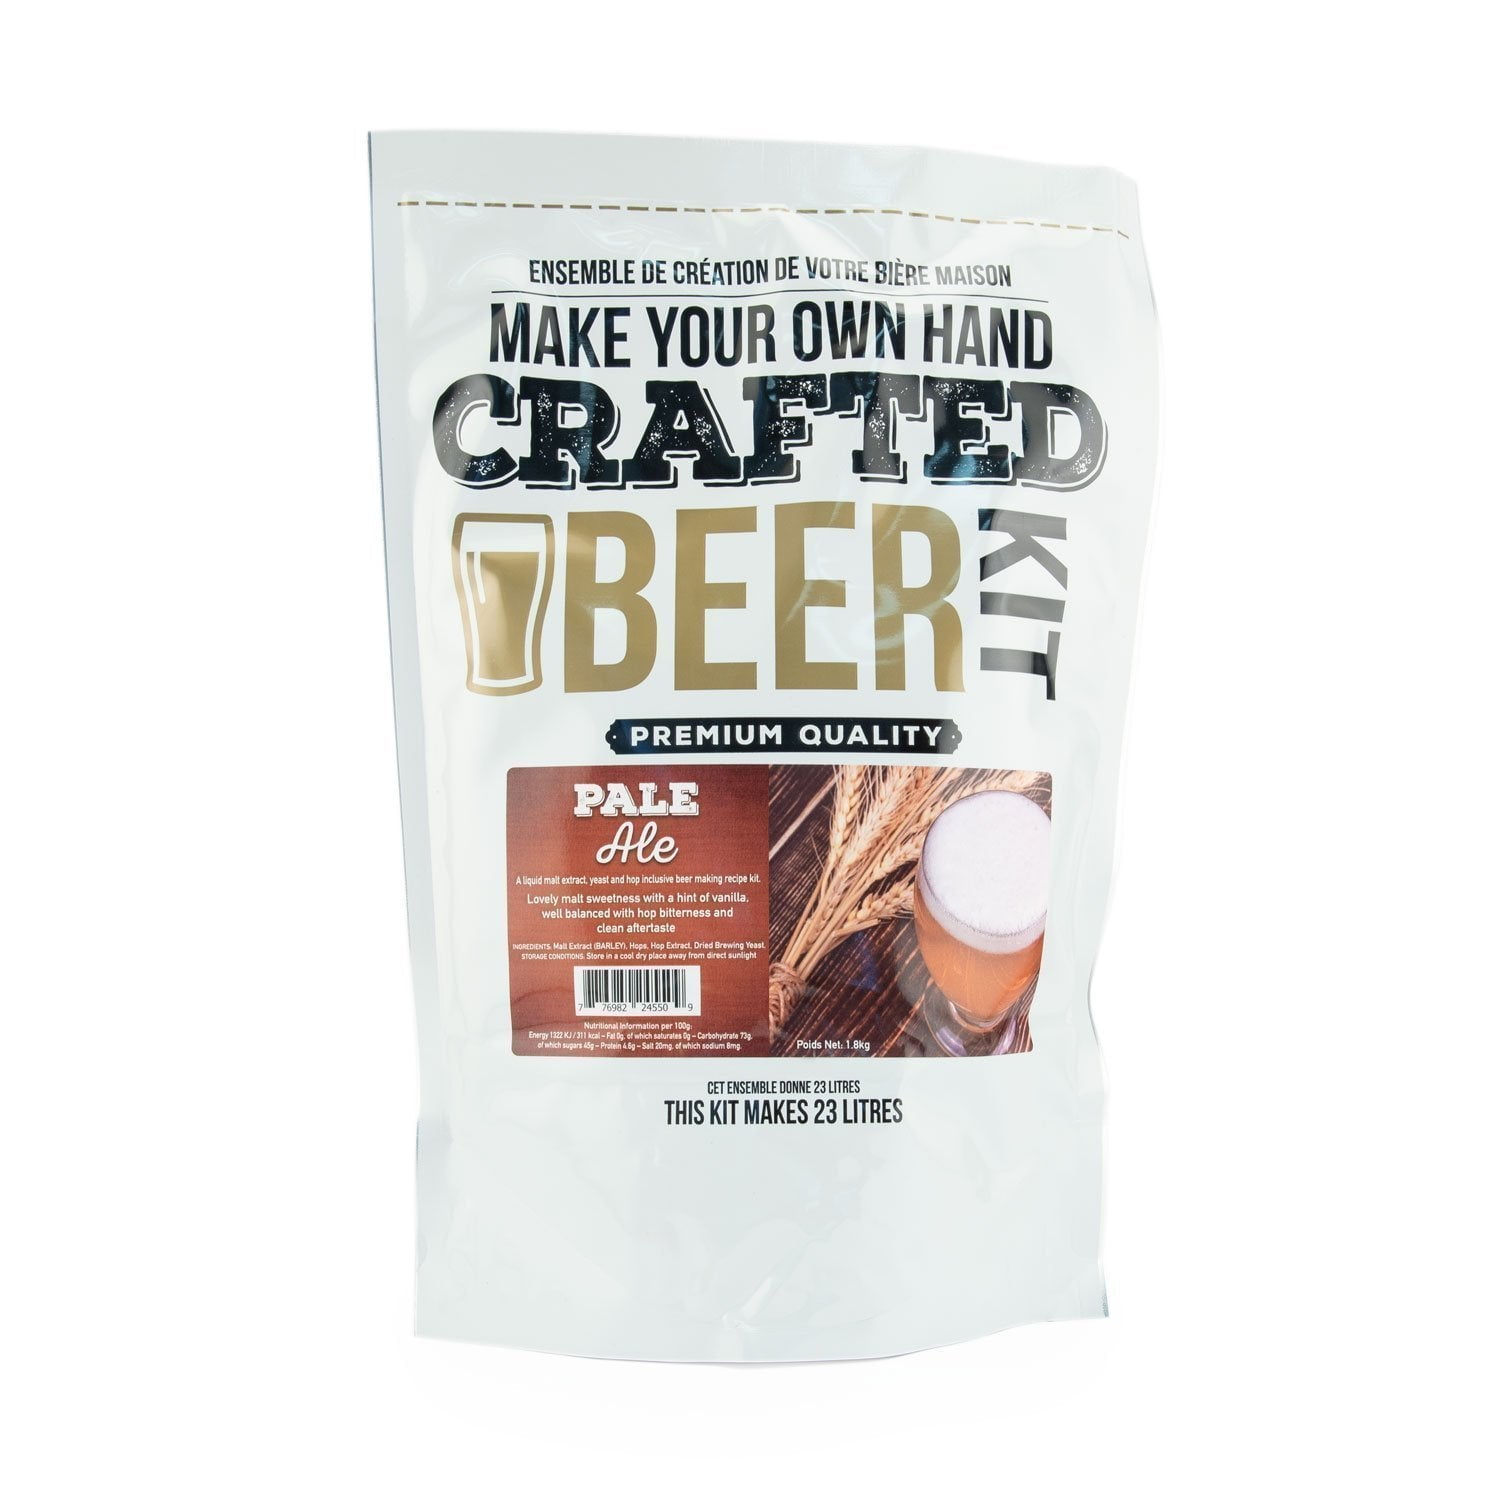 Blonde Lager Beer Kit Pouch (1.5 kg